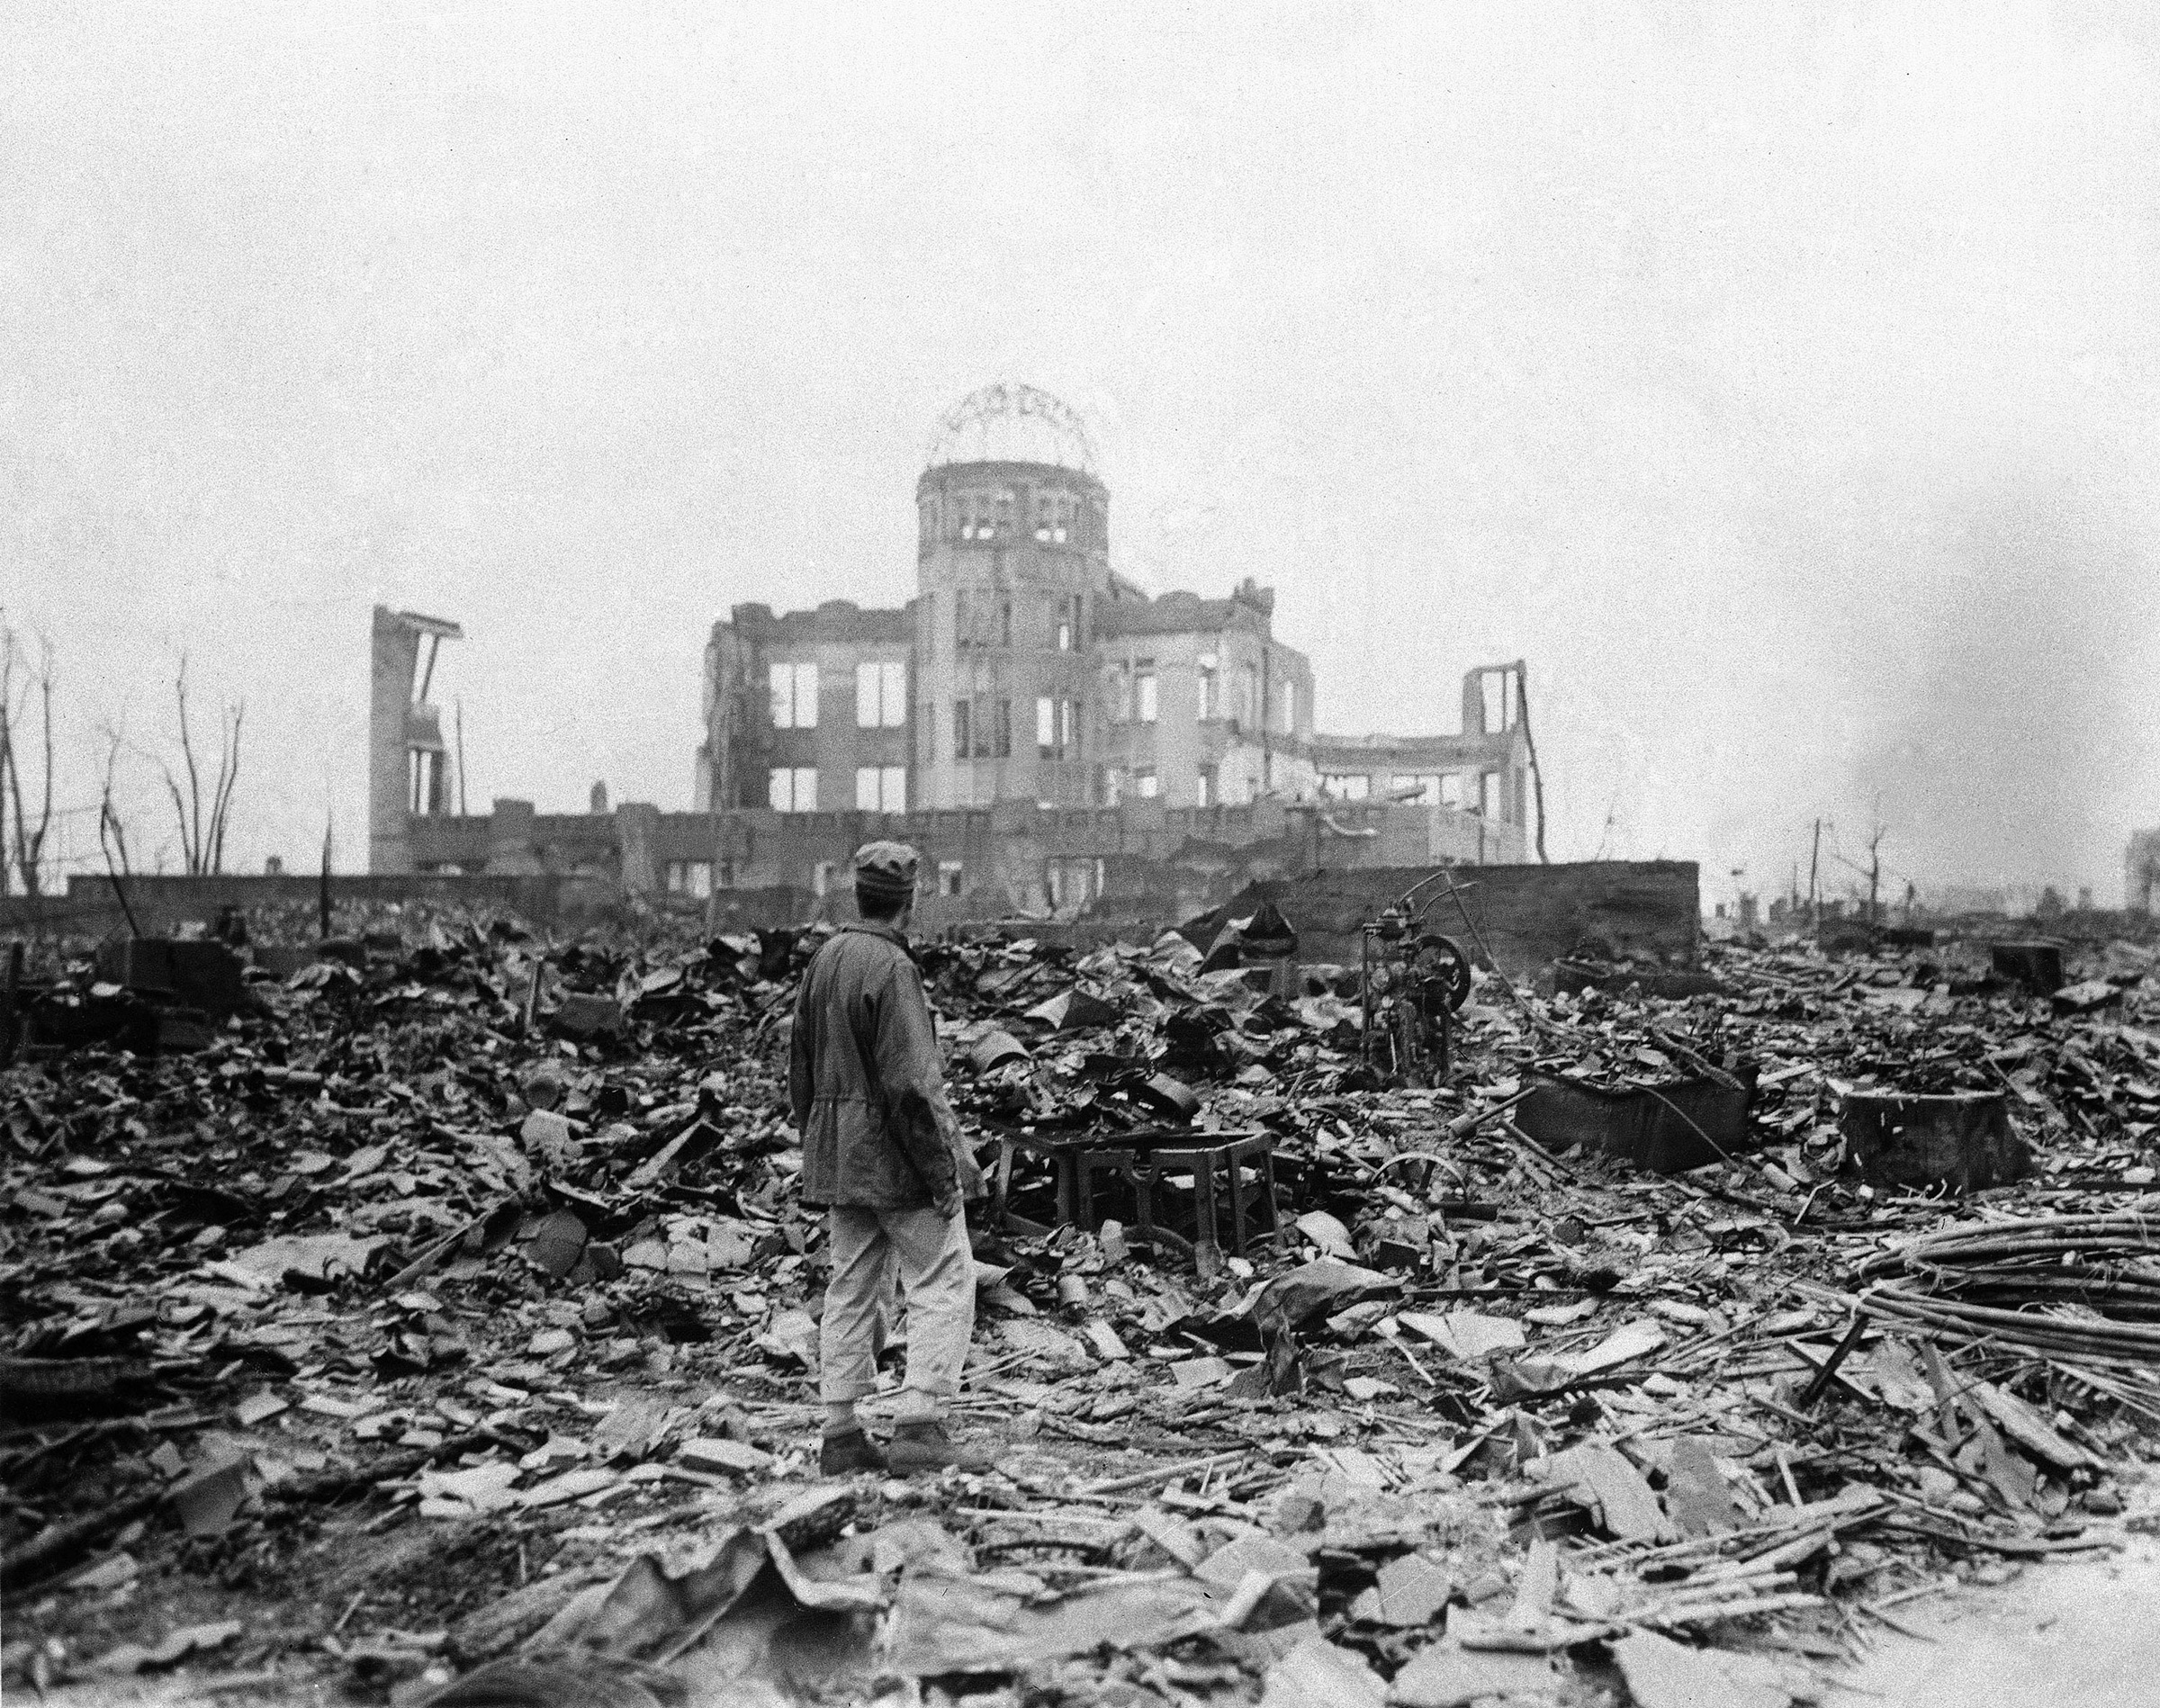 An allied correspondent stands in a sea of rubble before the shell of a building that once was a movie theater in Hiroshima, Sept. 8, 1945, a month after the first atomic bomb ever used in warfare was dropped by the U.S. to hasten Japan's surrender. (Stanley Troutman—AP)